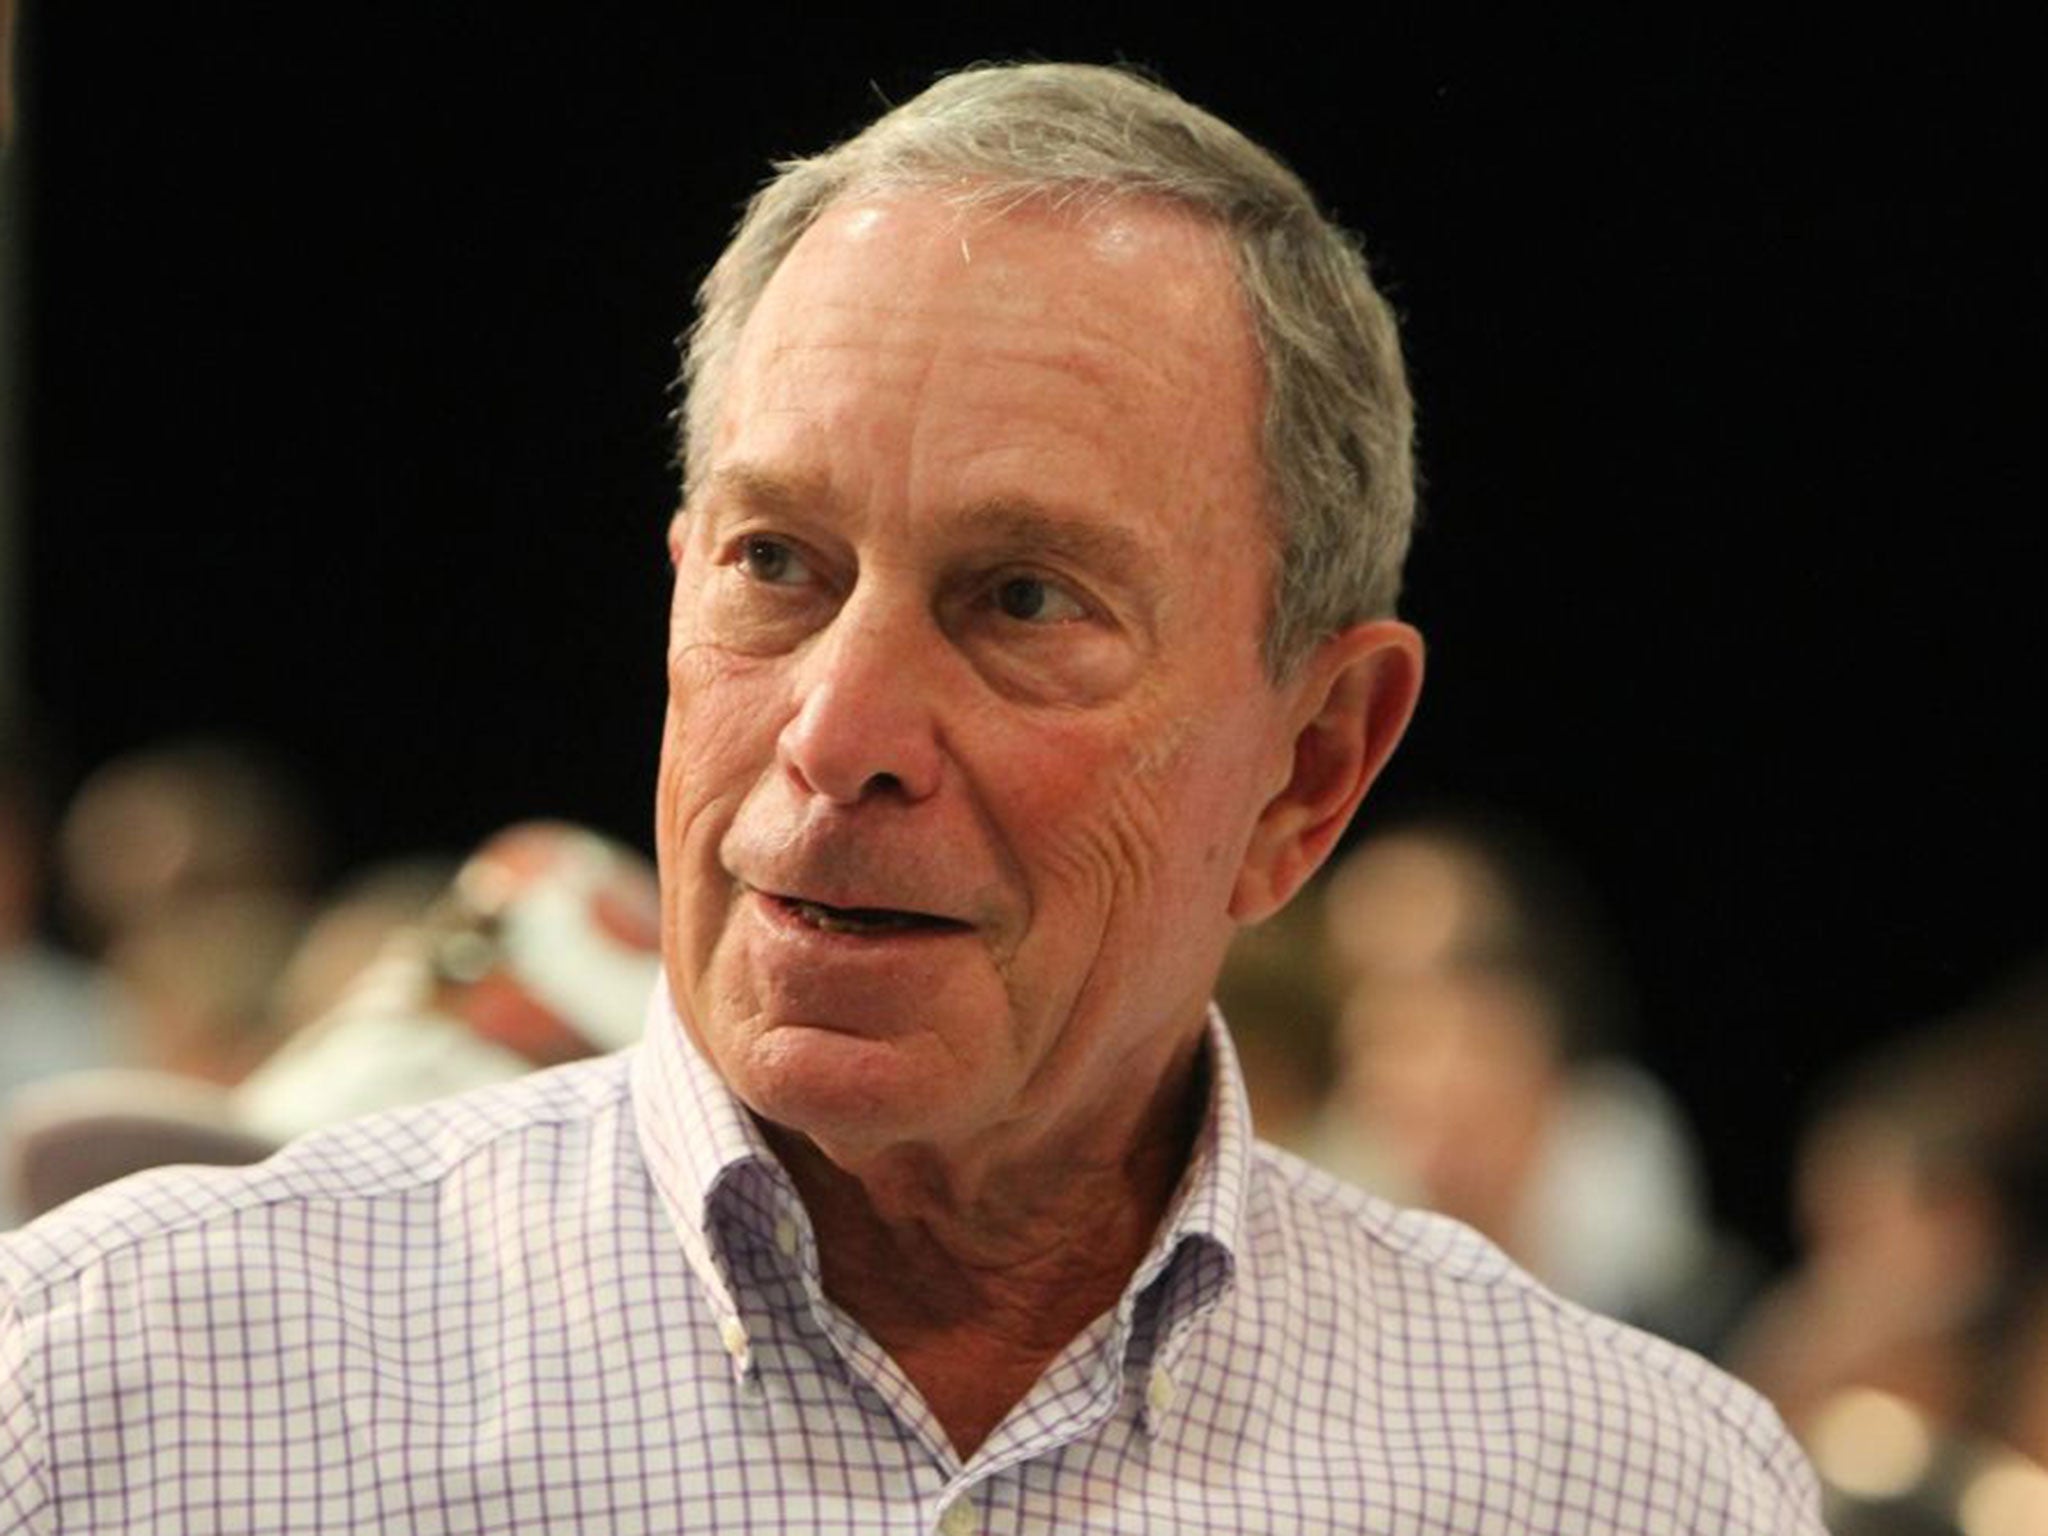 Michael Bloomberg will be able to add ‘KBE’ to his name